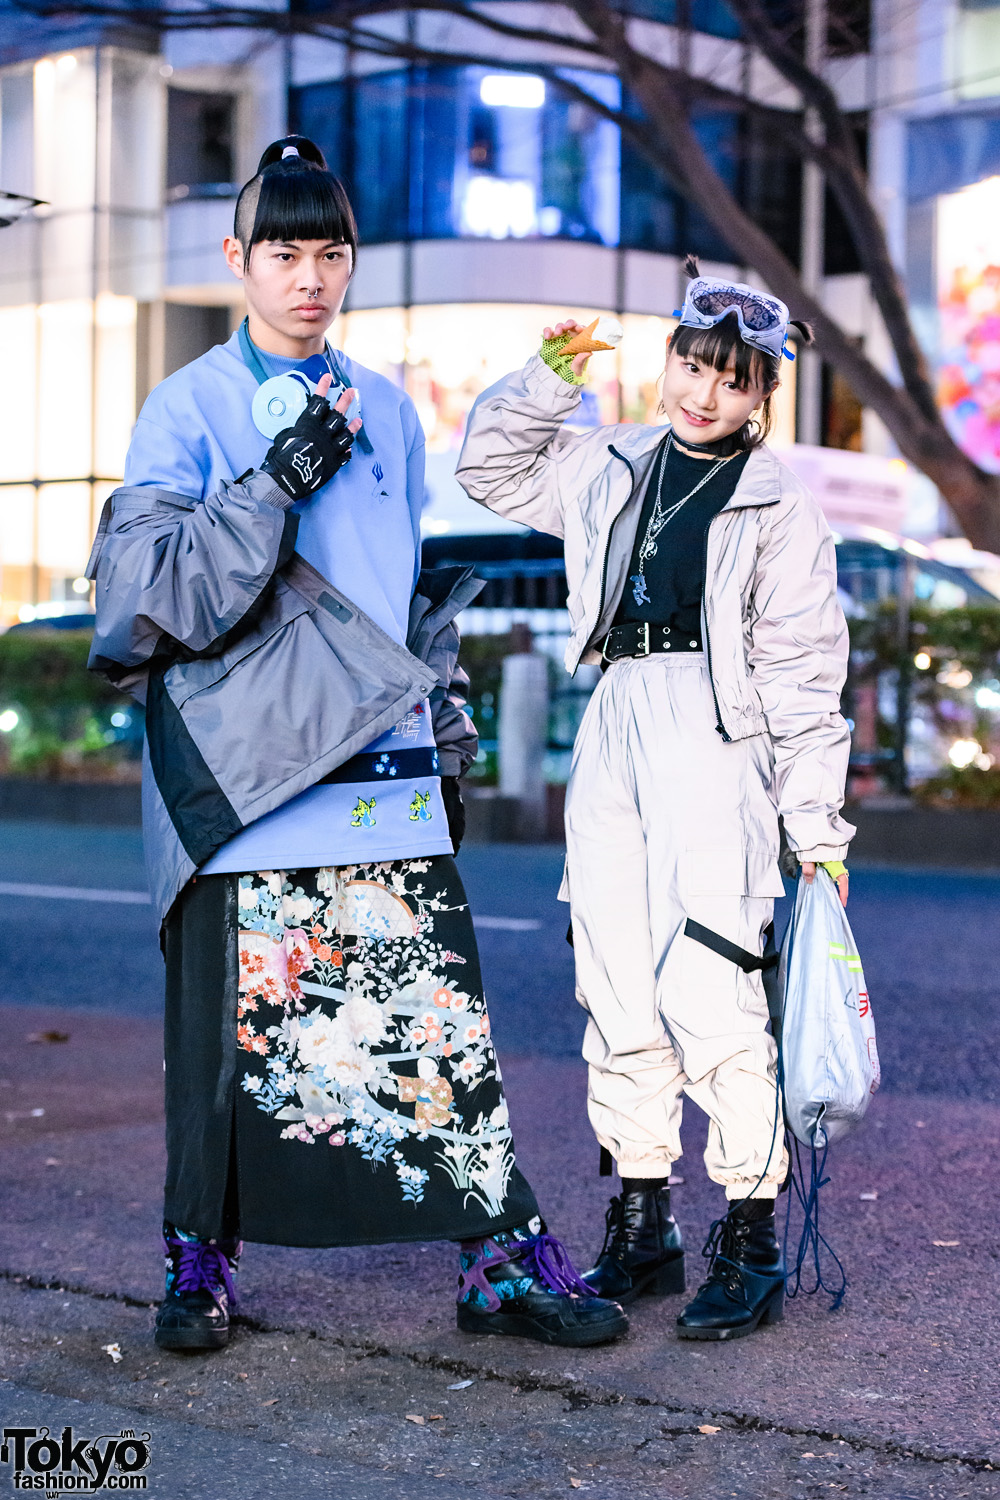 Tokyo Streetwear Styles w/ Partially-Shaved Hair, Gas Mask, Clear Goggles, Aoi Industry, Forever21 Metallic Suit, ME Harajuku & Reebok Insta Pump Fury Sneakers